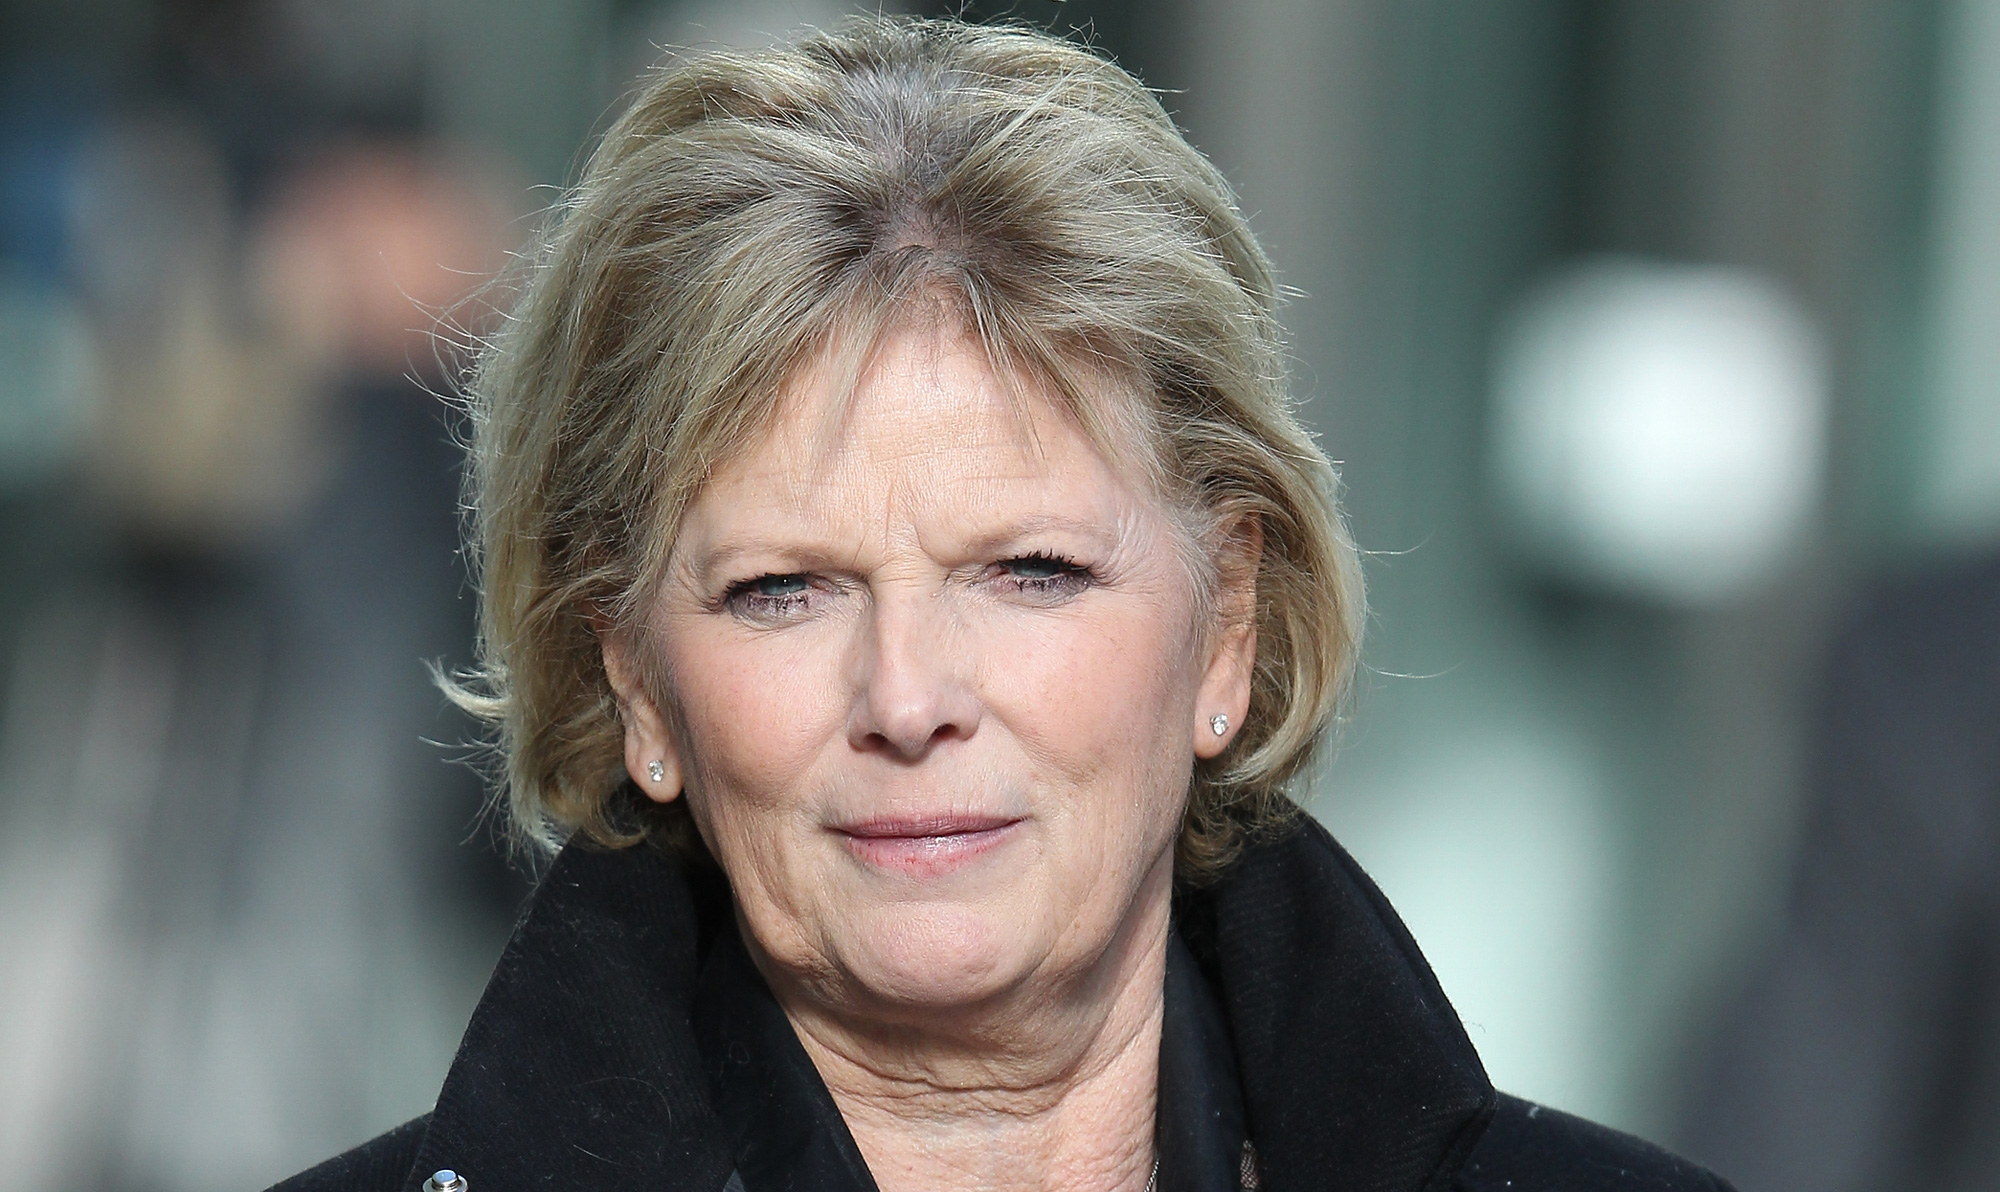 British MP Anna Soubry: fearless and independent-minded
